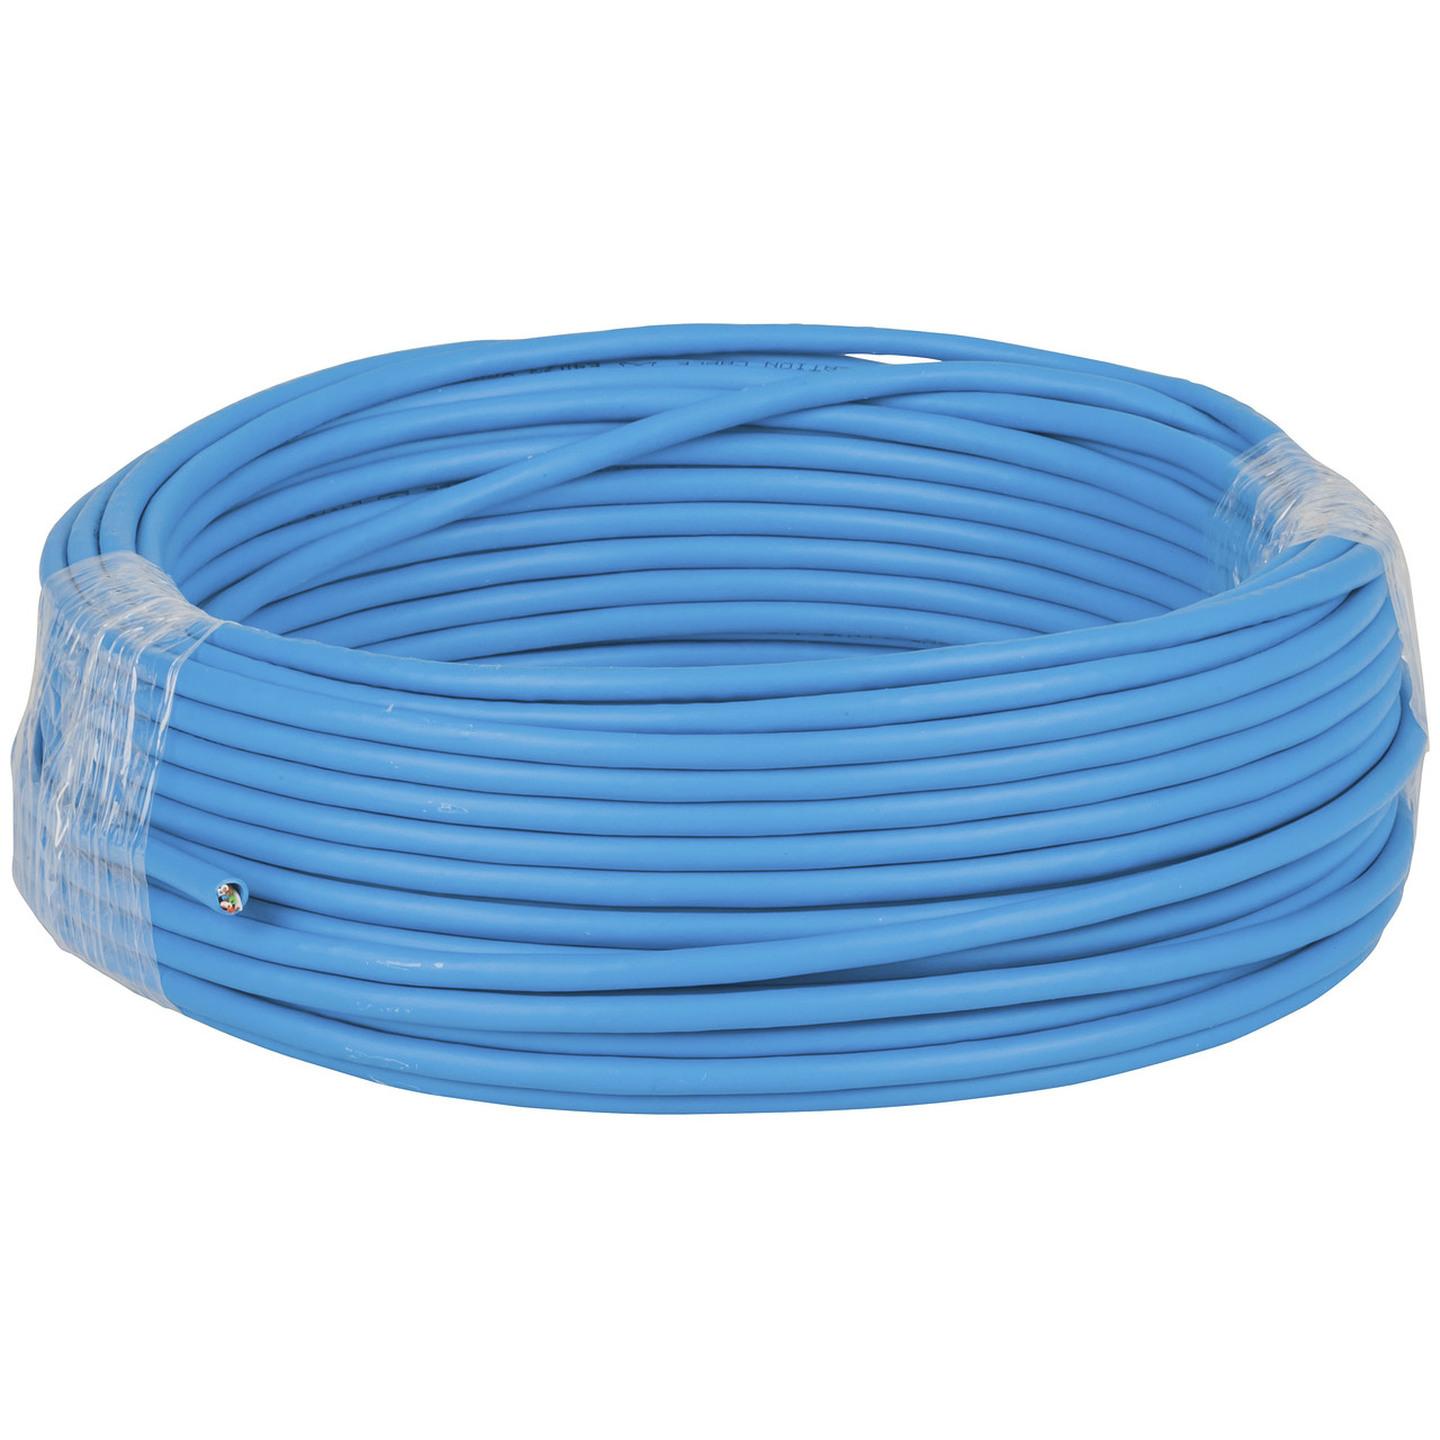 Cat 5e Solid Network Cable - Polywrapped 30M pack